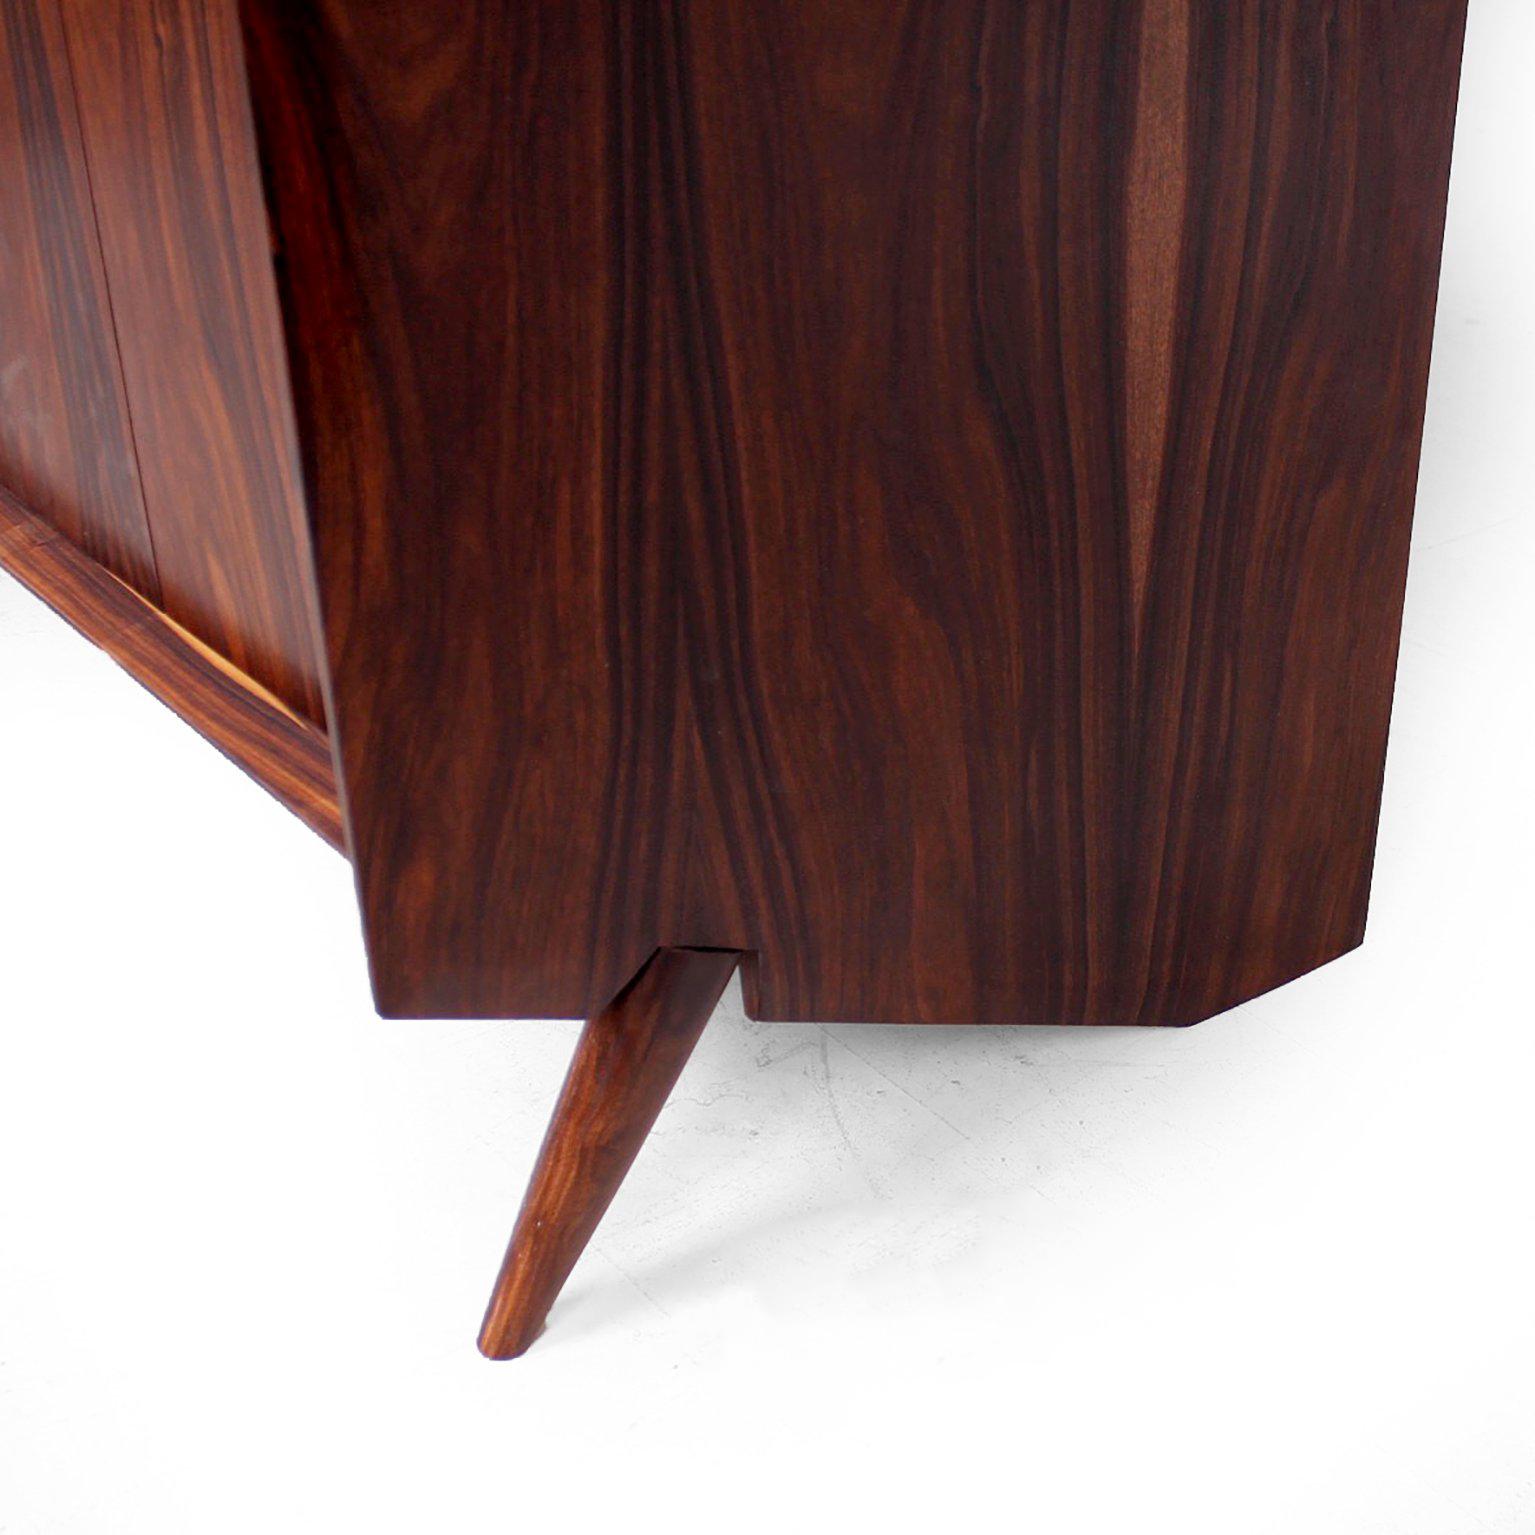 Contemporary Magnificent Rosewood Armoire Gentleman's Cabinet by Pablo Romo for Ambianic